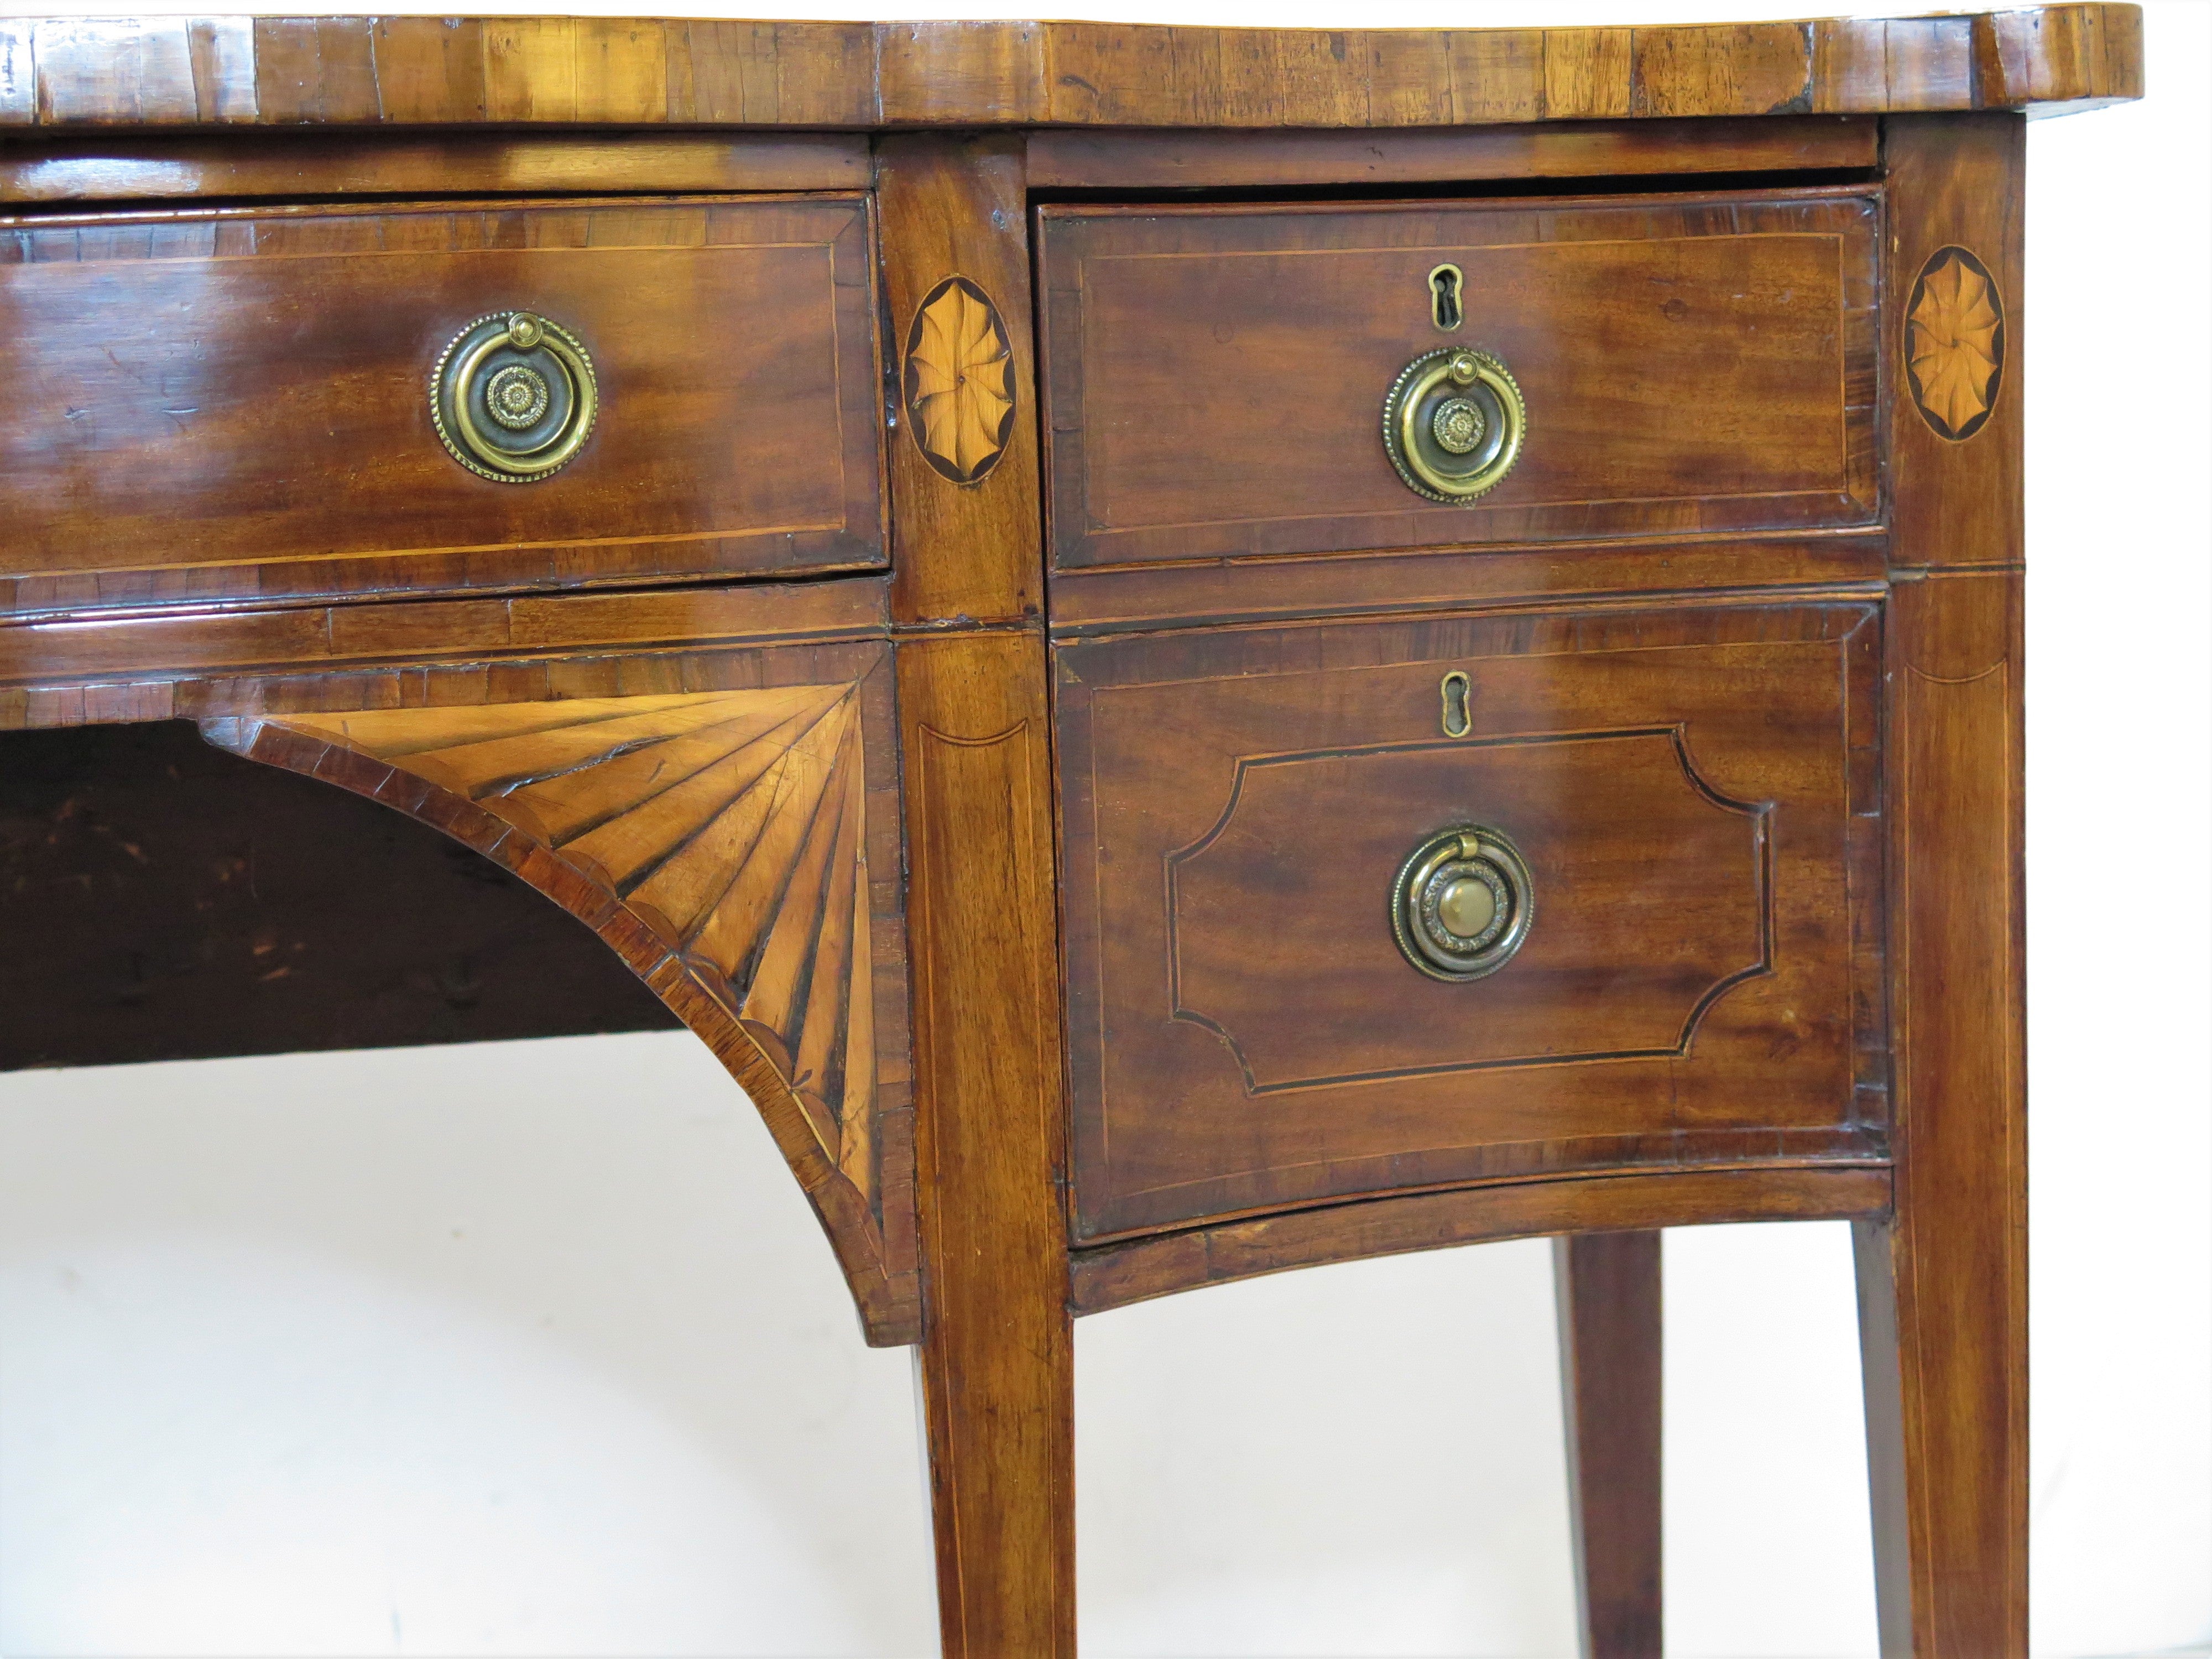 A Diminutive George III Mahogany Sideboard with Oxbow Front